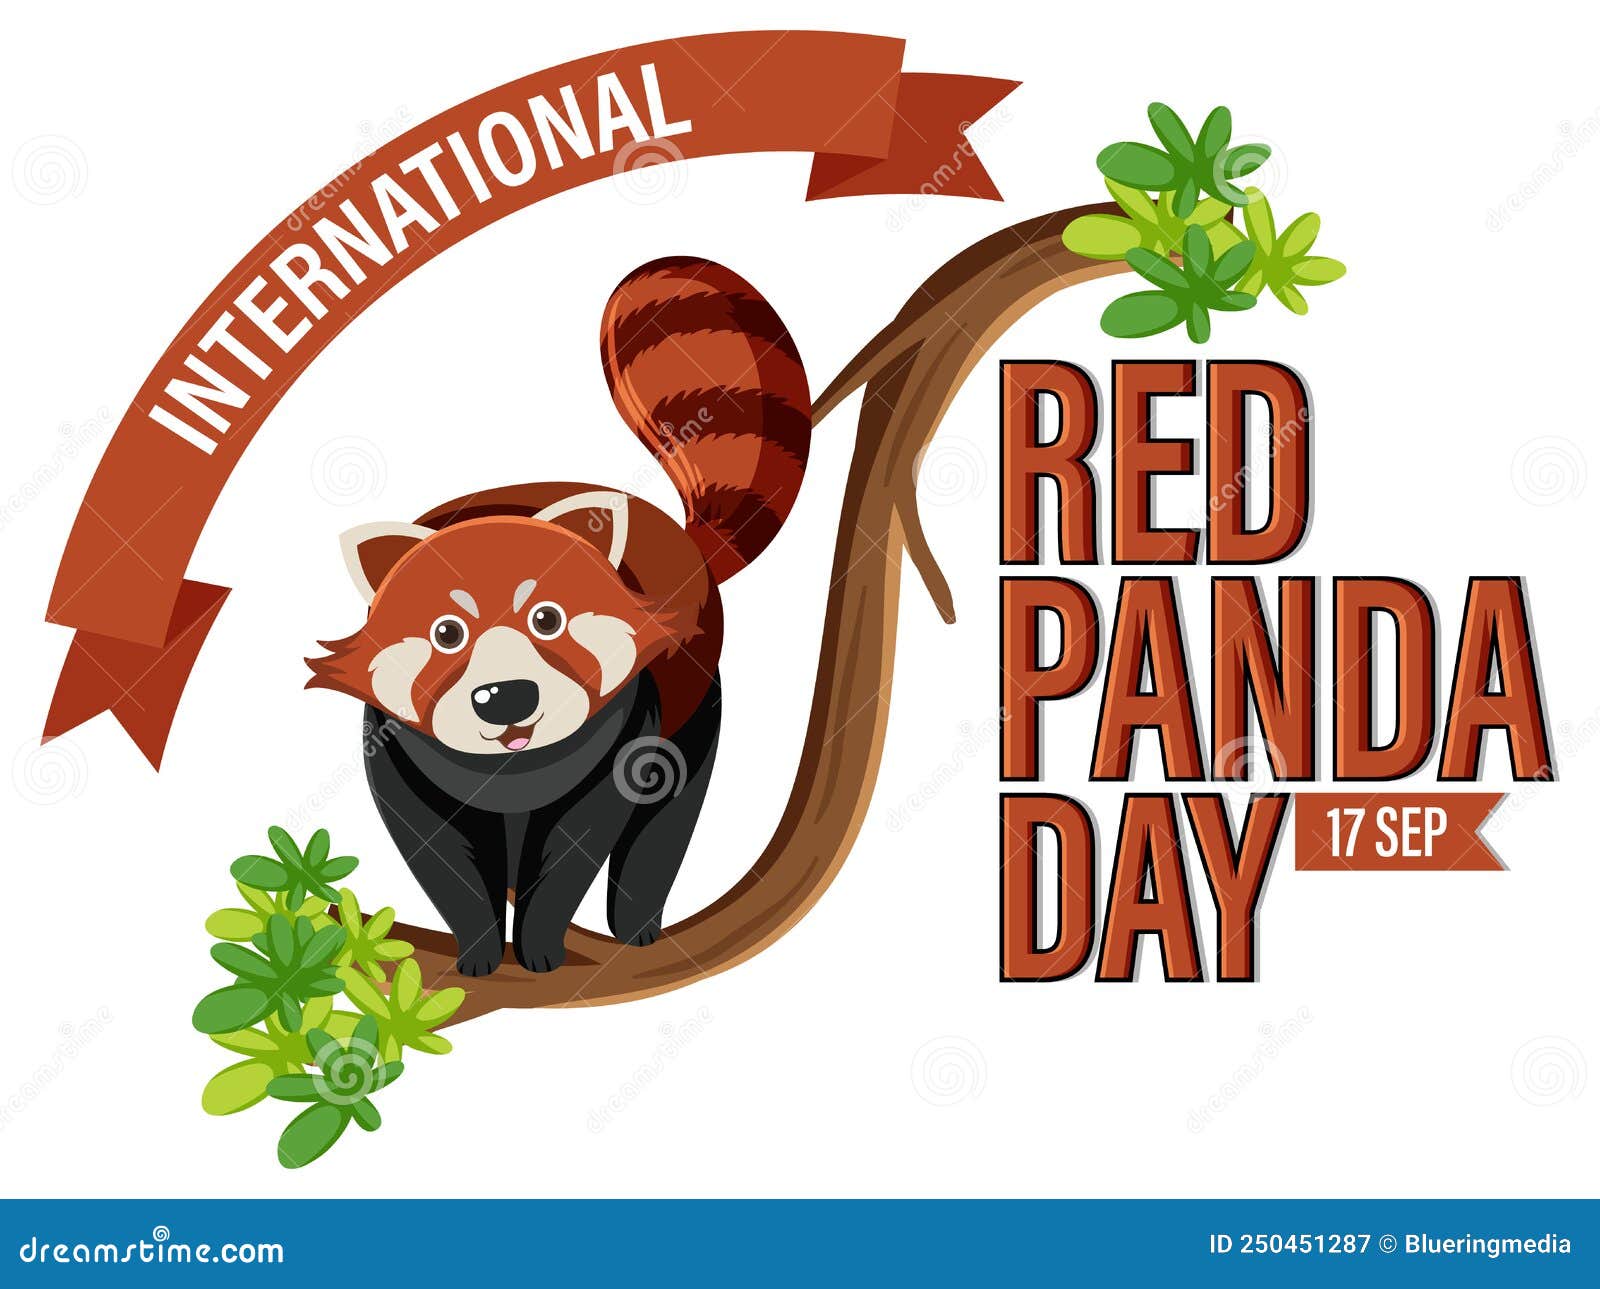 International Red Panda Day Stock Vector Illustration of color, cute